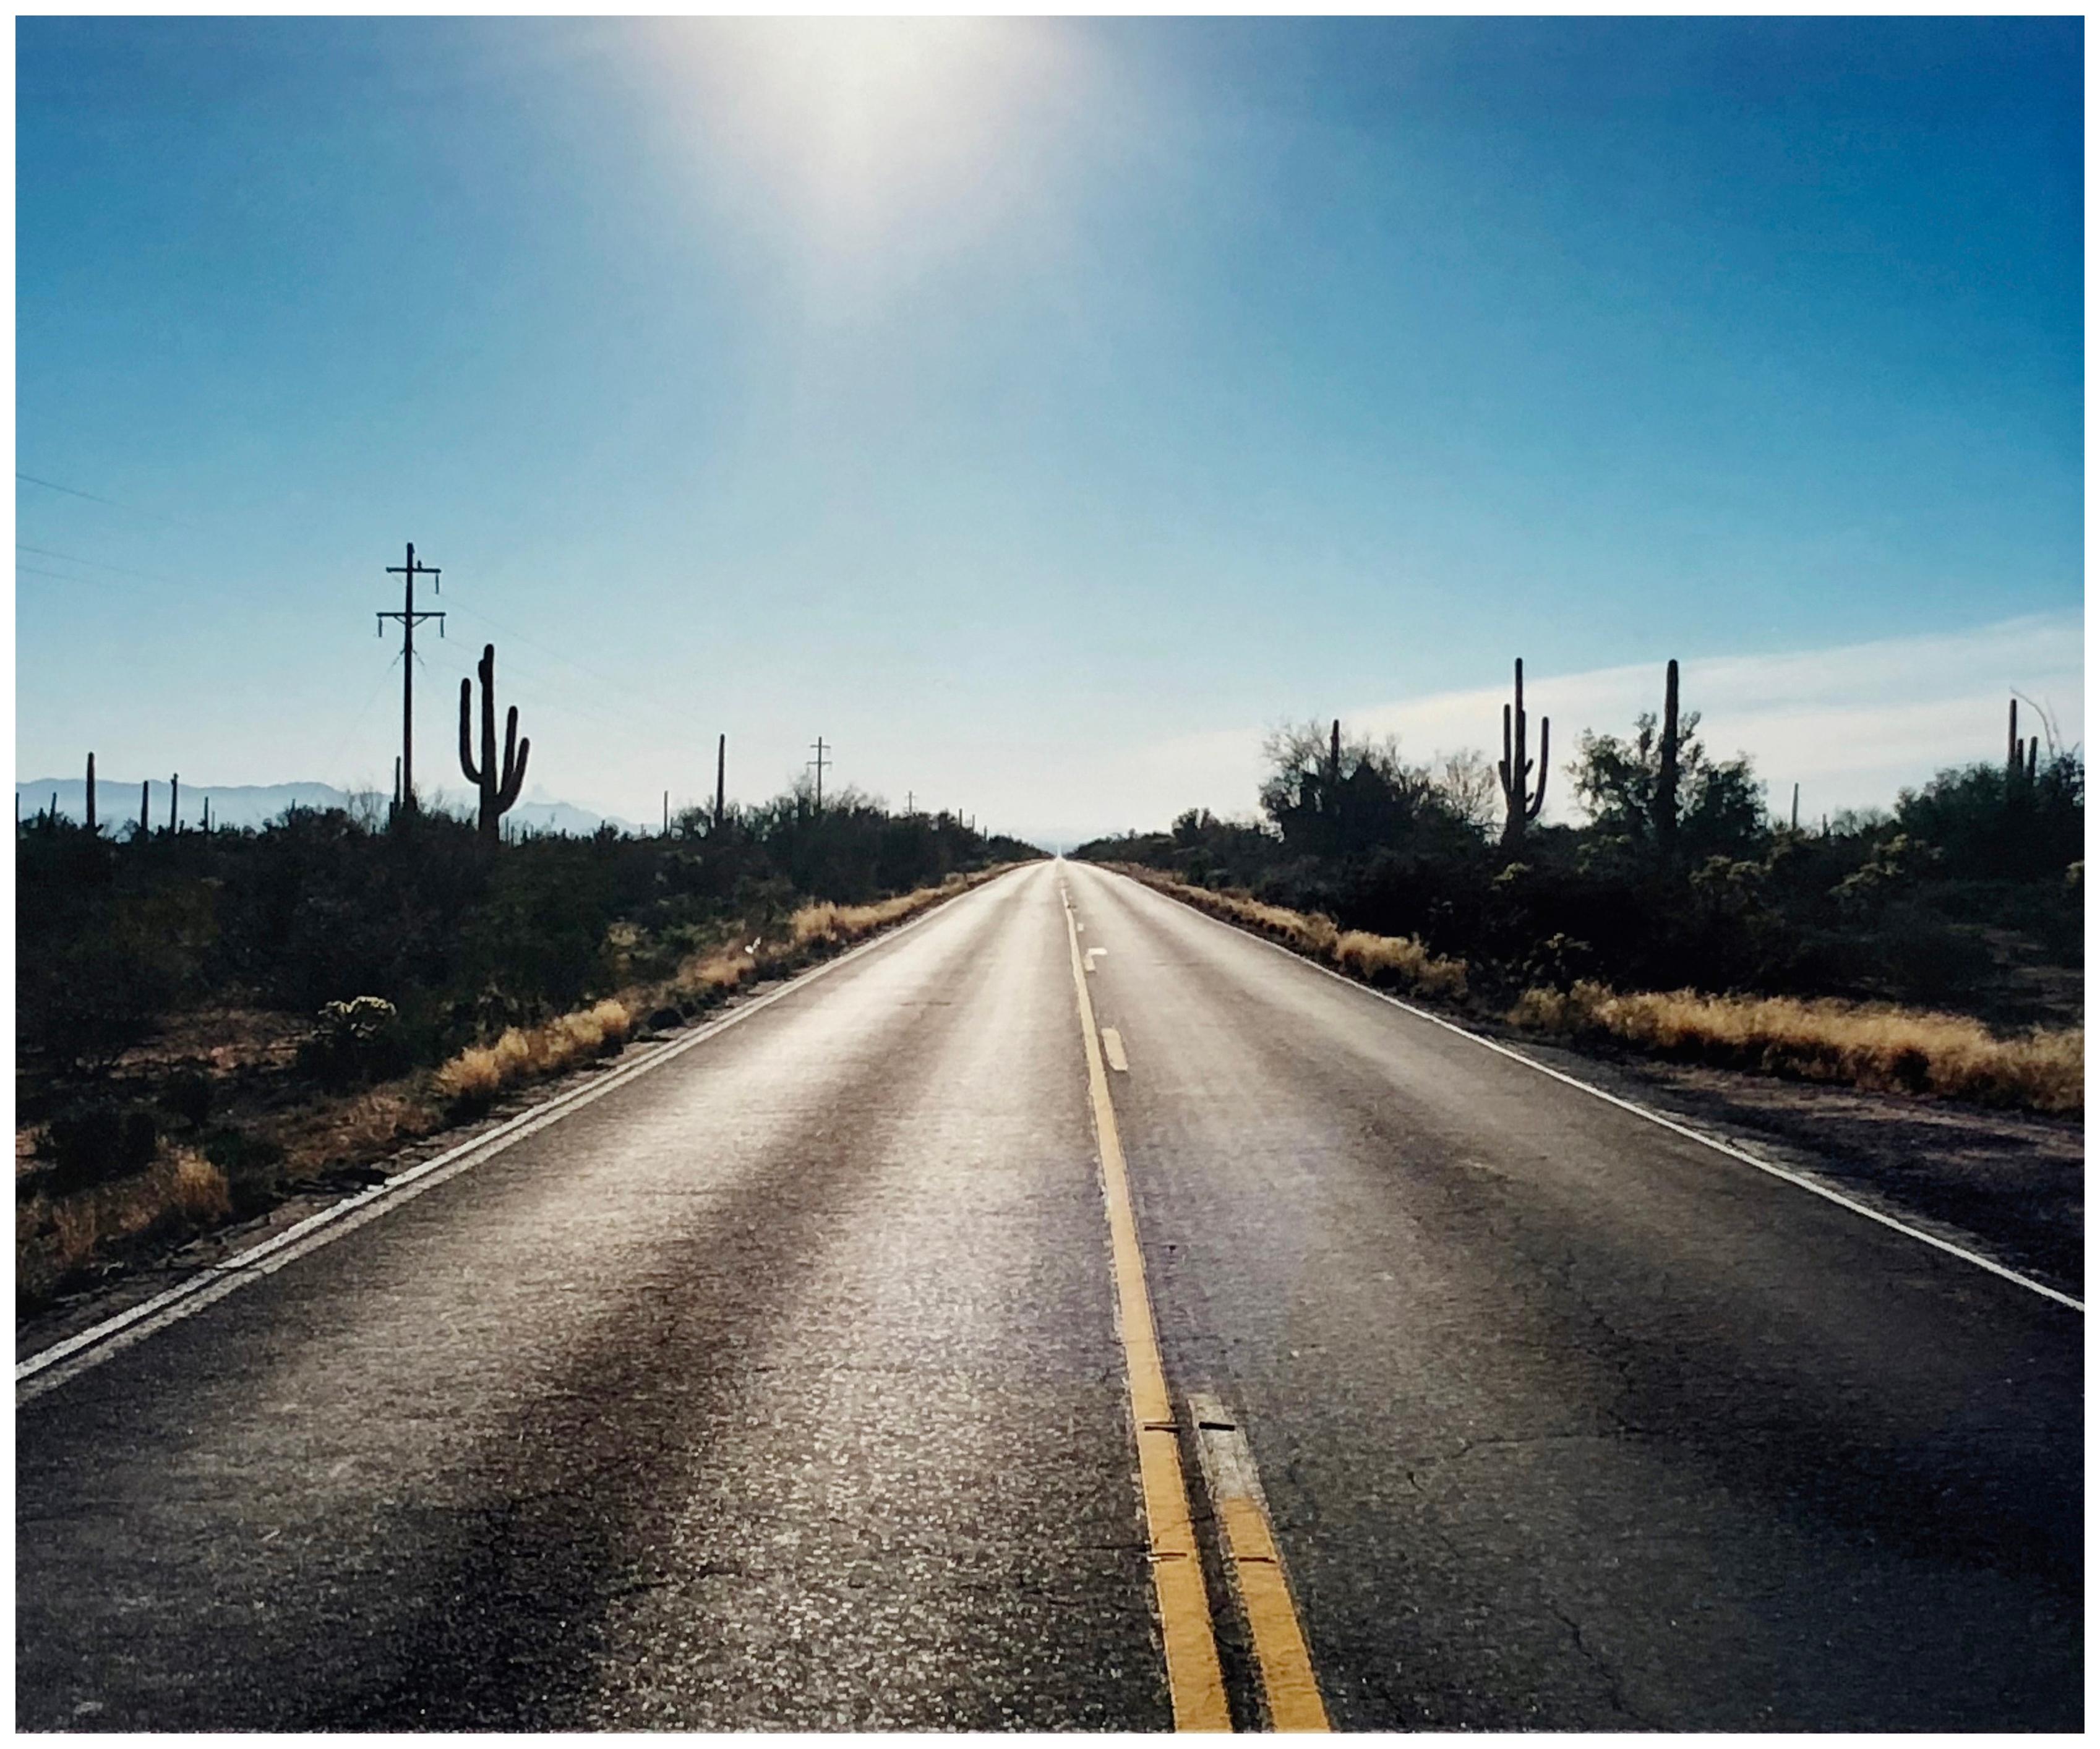 Road to Gunsight, photograph from Richard Heeps 'Dream in Color' Series, this is the classic American open road photograph, which is a metaphor throughout Richard's work. The early morning sunlight and the road combine to create this iconic American